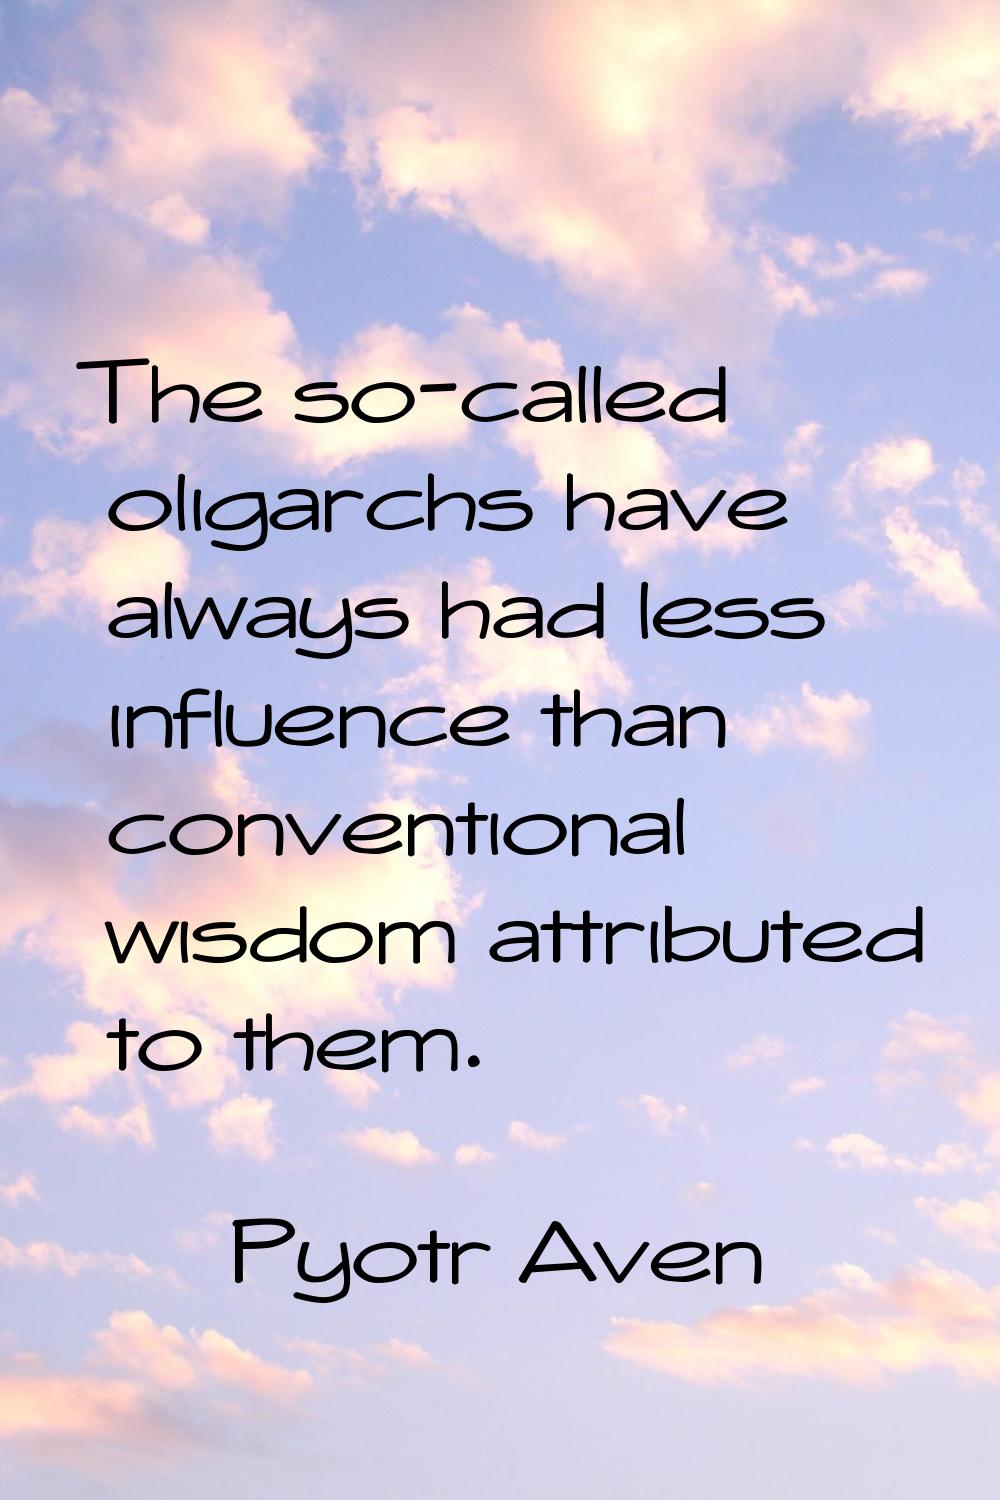 The so-called oligarchs have always had less influence than conventional wisdom attributed to them.